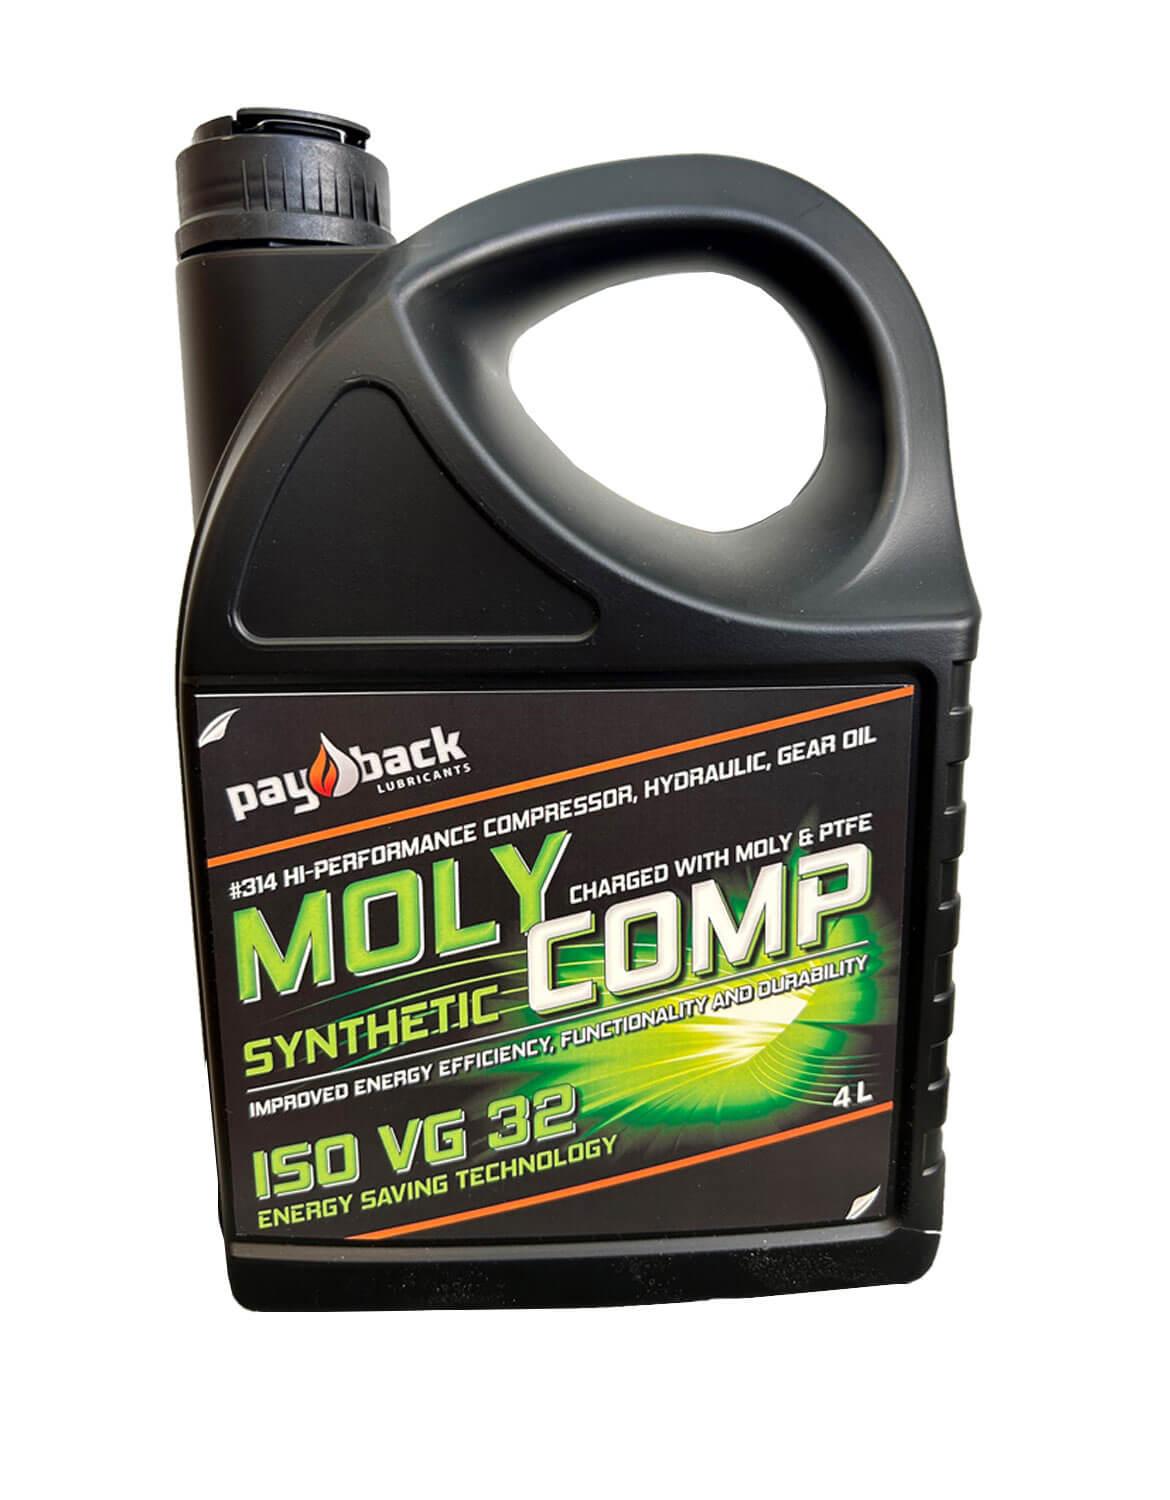 Payback Moly Comp Synthetic ISO VG 32, 4 L